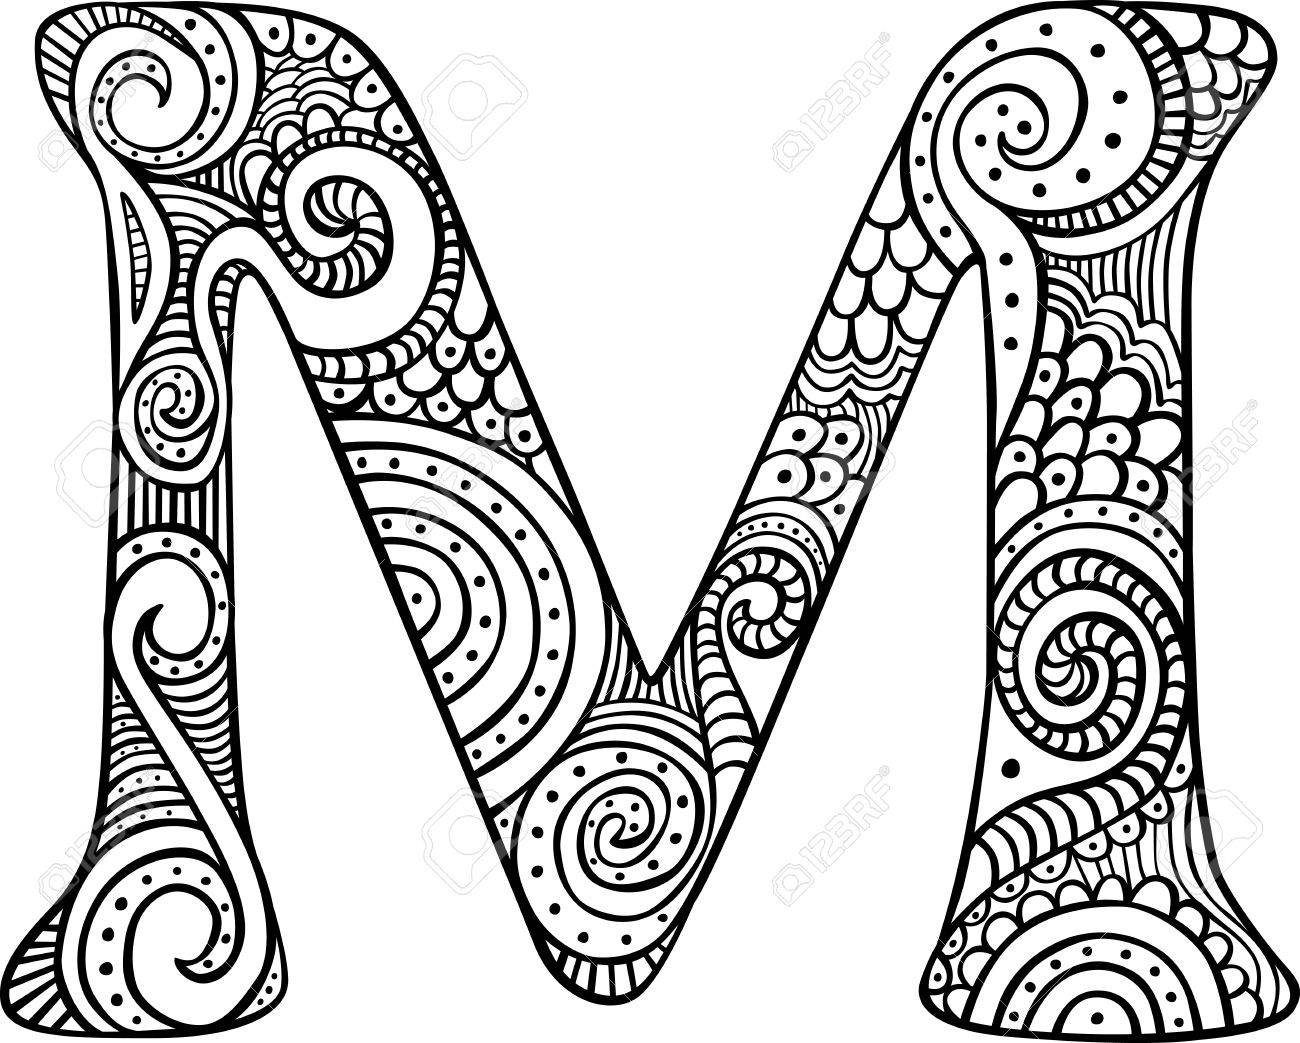 letter-m-drawing-at-getdrawings-free-download